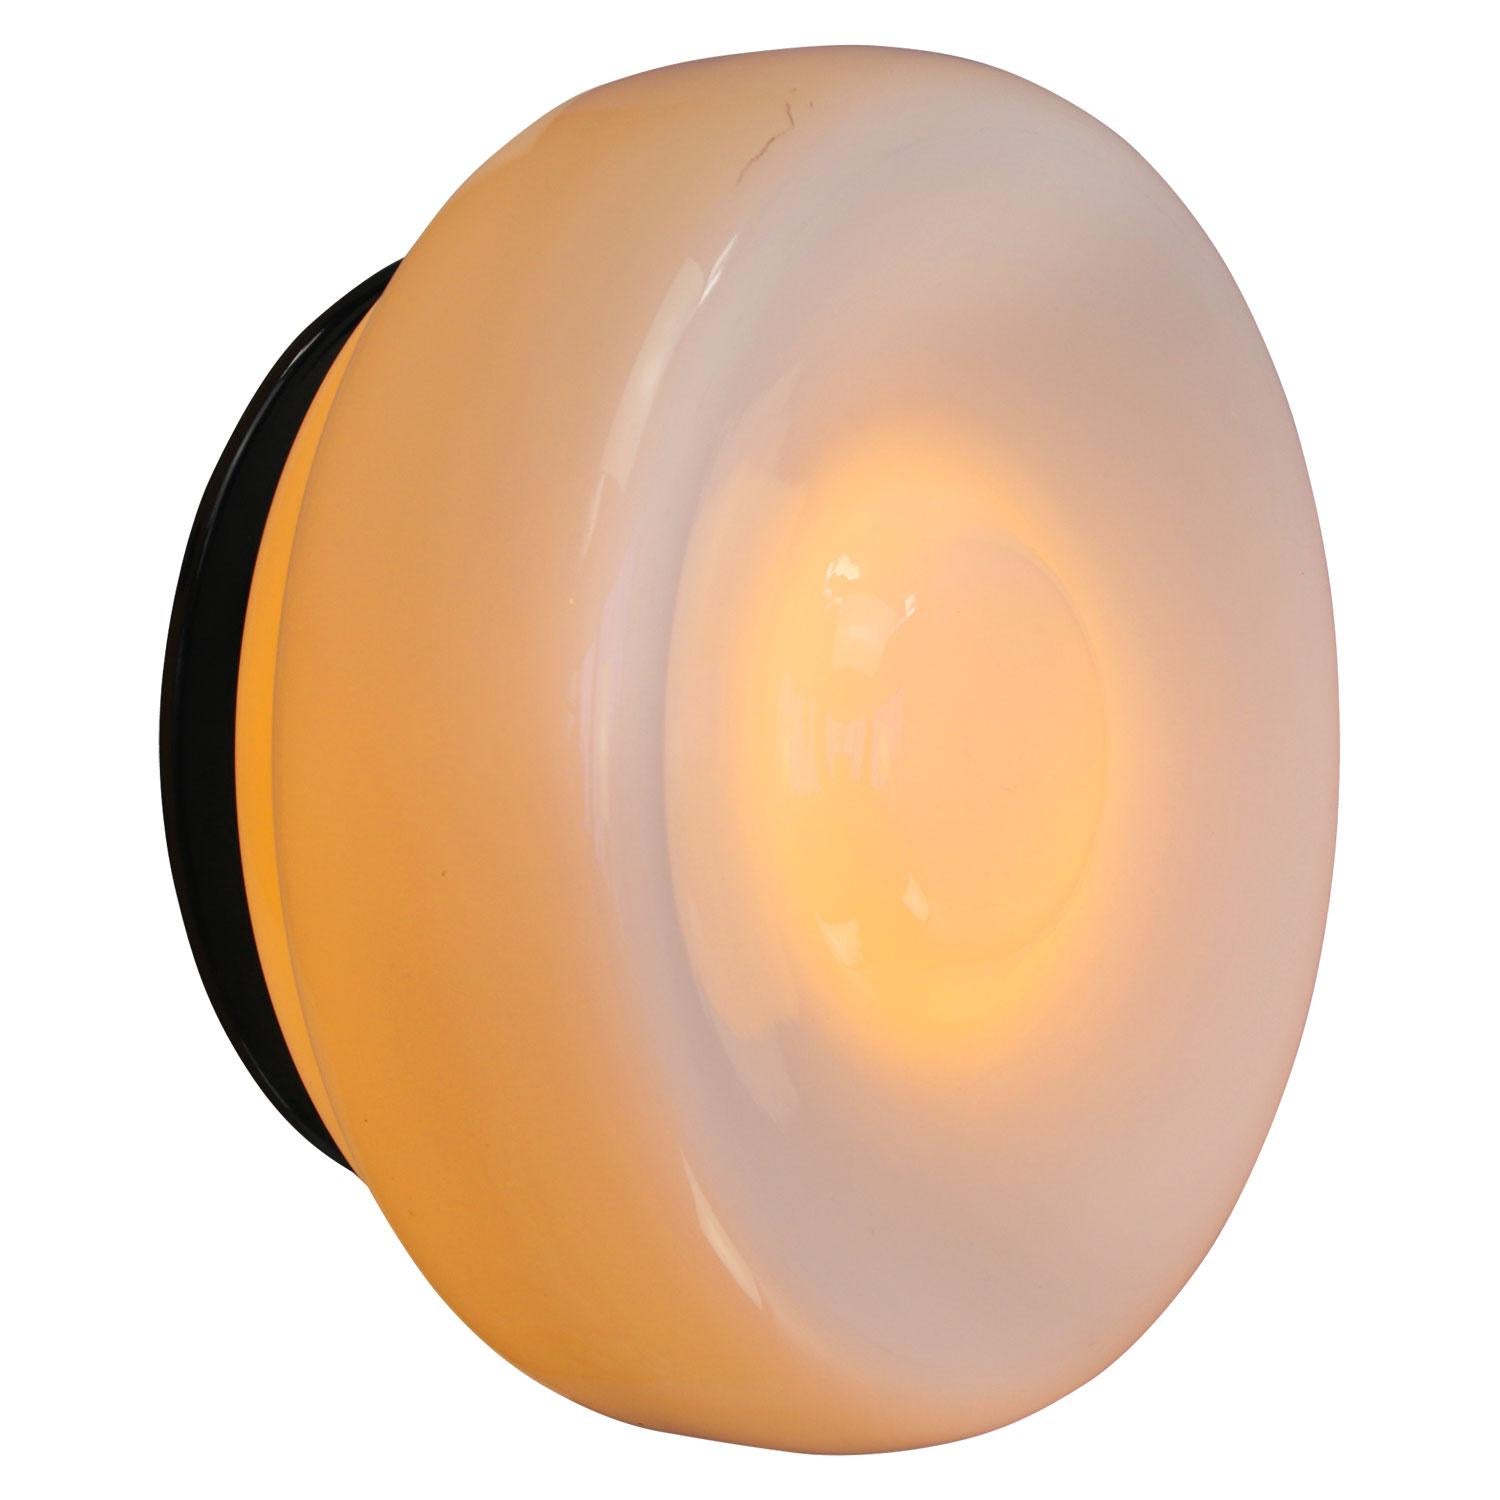 Industrial ceiling / wall lamp.
Aluminum base with white opaline glass.

Weight: 2.10 kg / 4.6 lb

Priced per individual item. All lamps have been made suitable by international standards for incandescent light bulbs, energy-efficient and LED